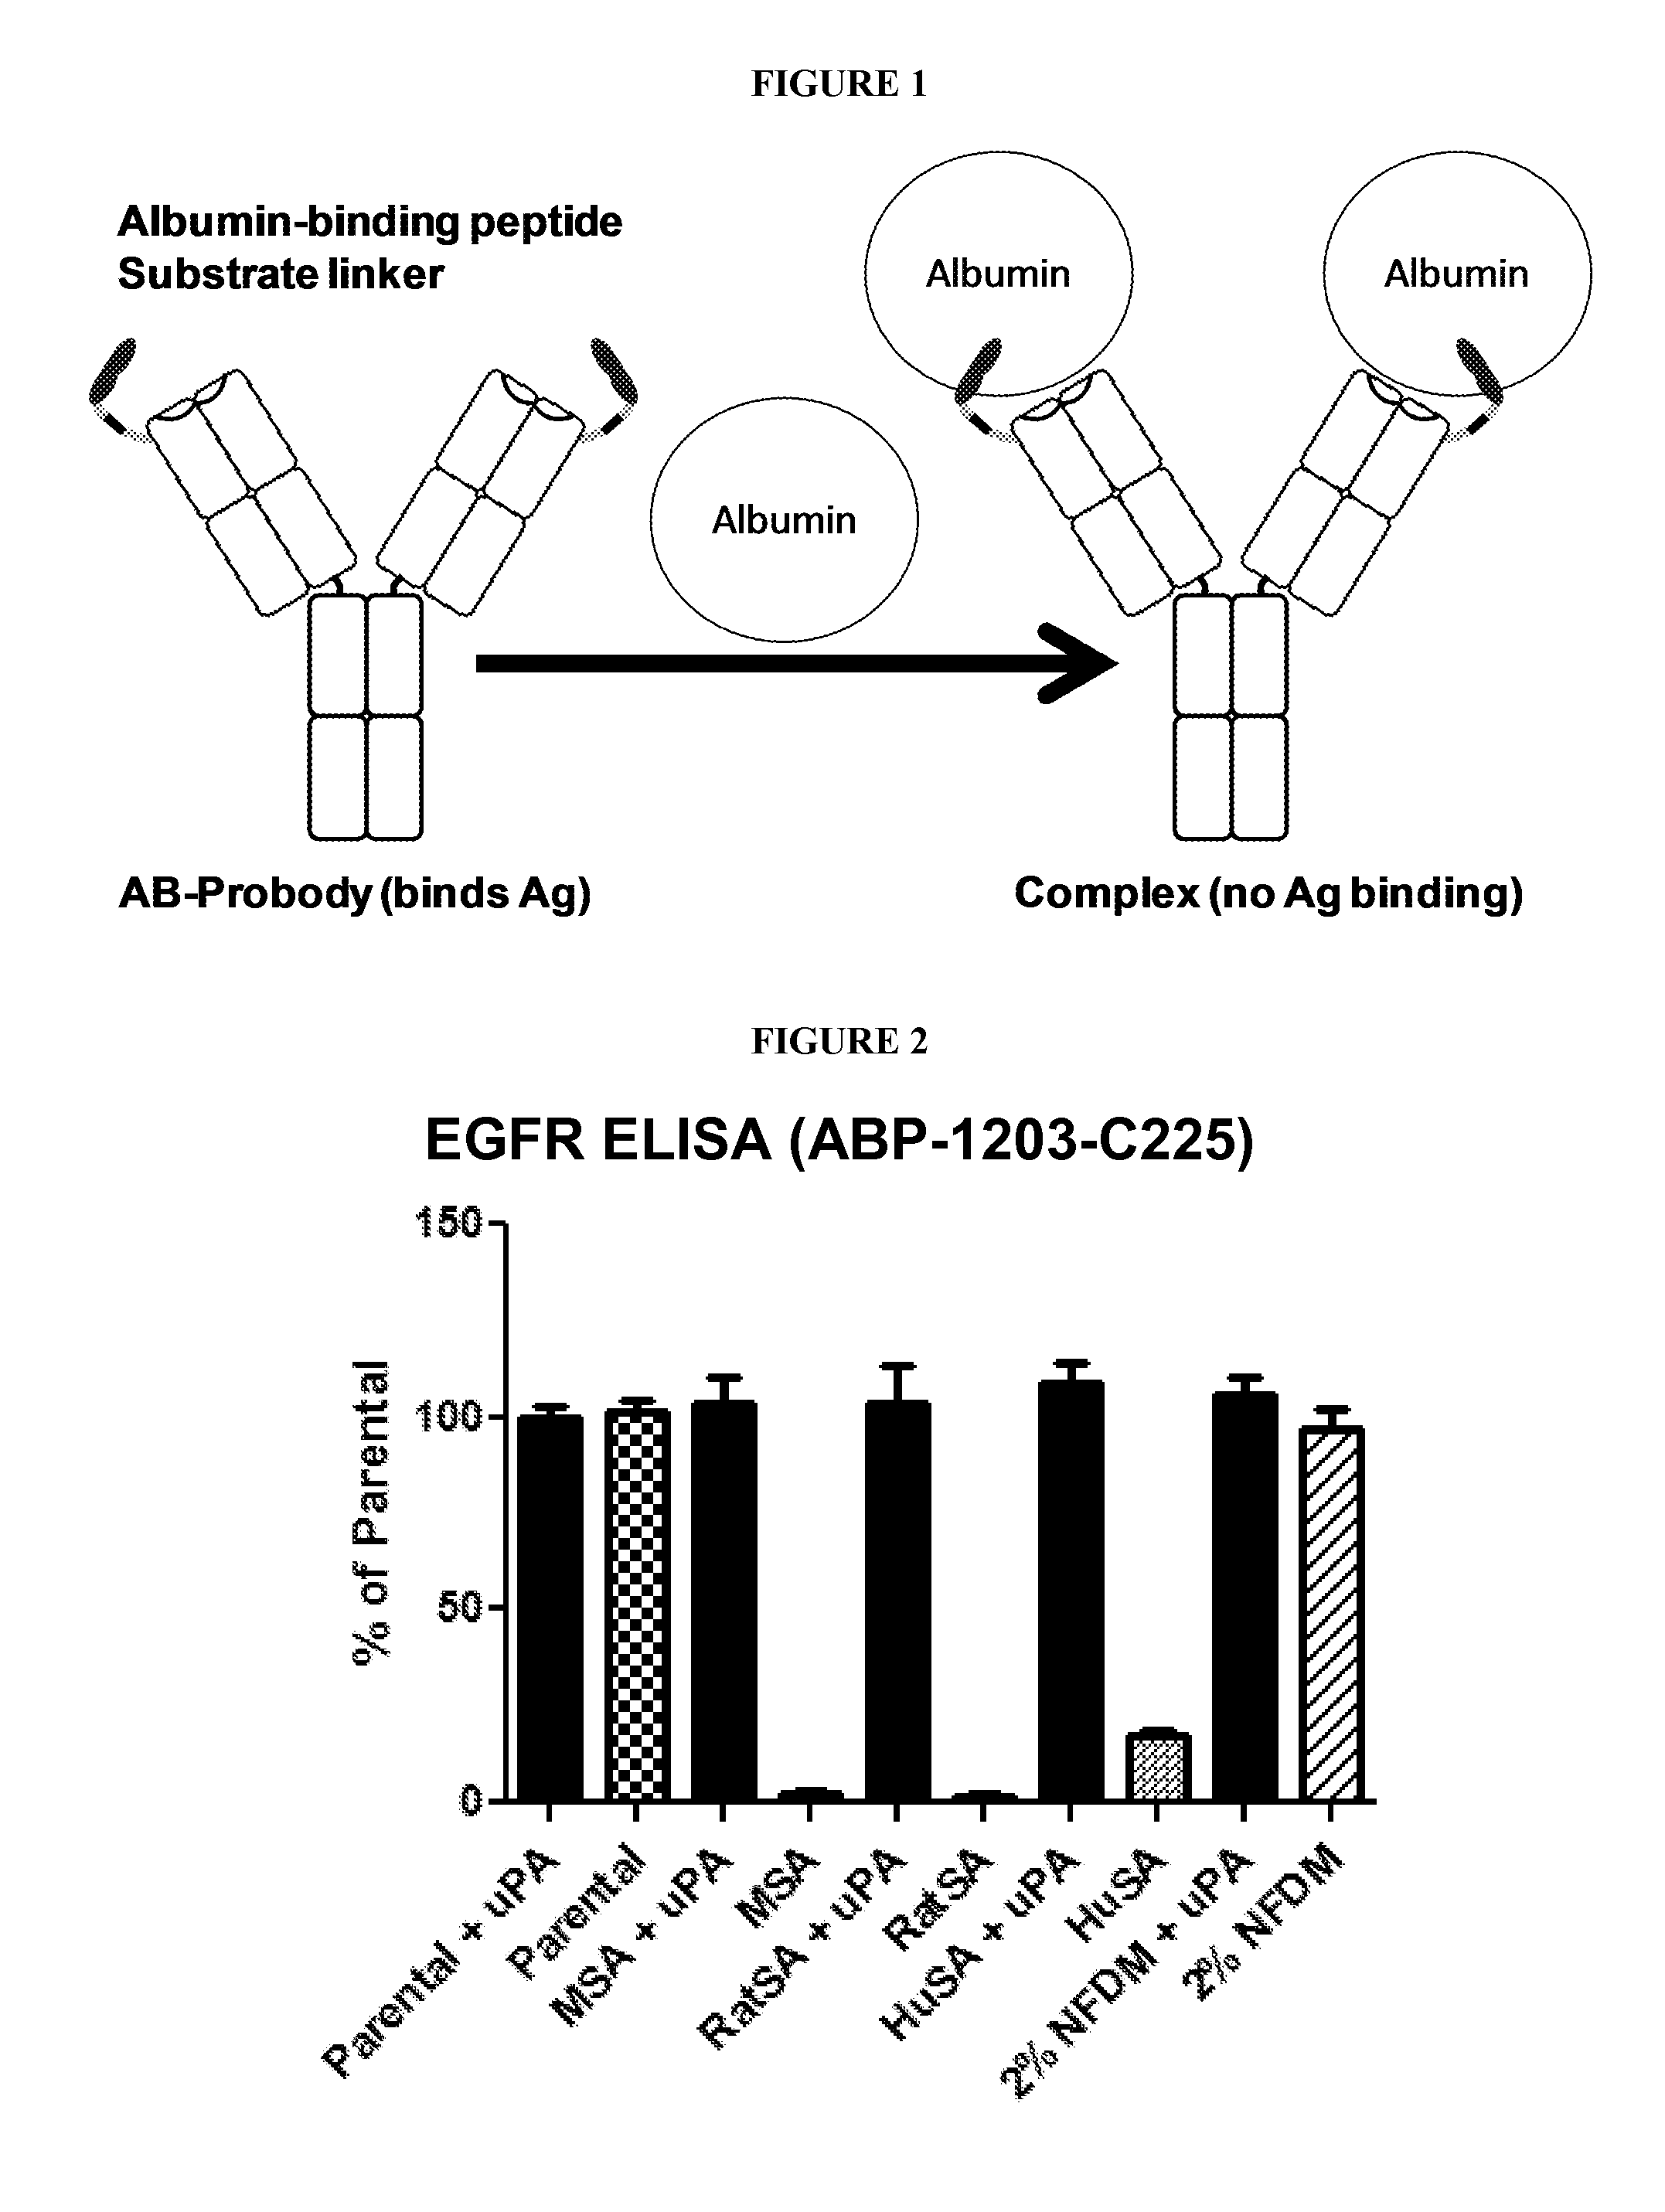 Activatable Antibodies Having Non-Binding Steric Moieties and Methods of Using the Same